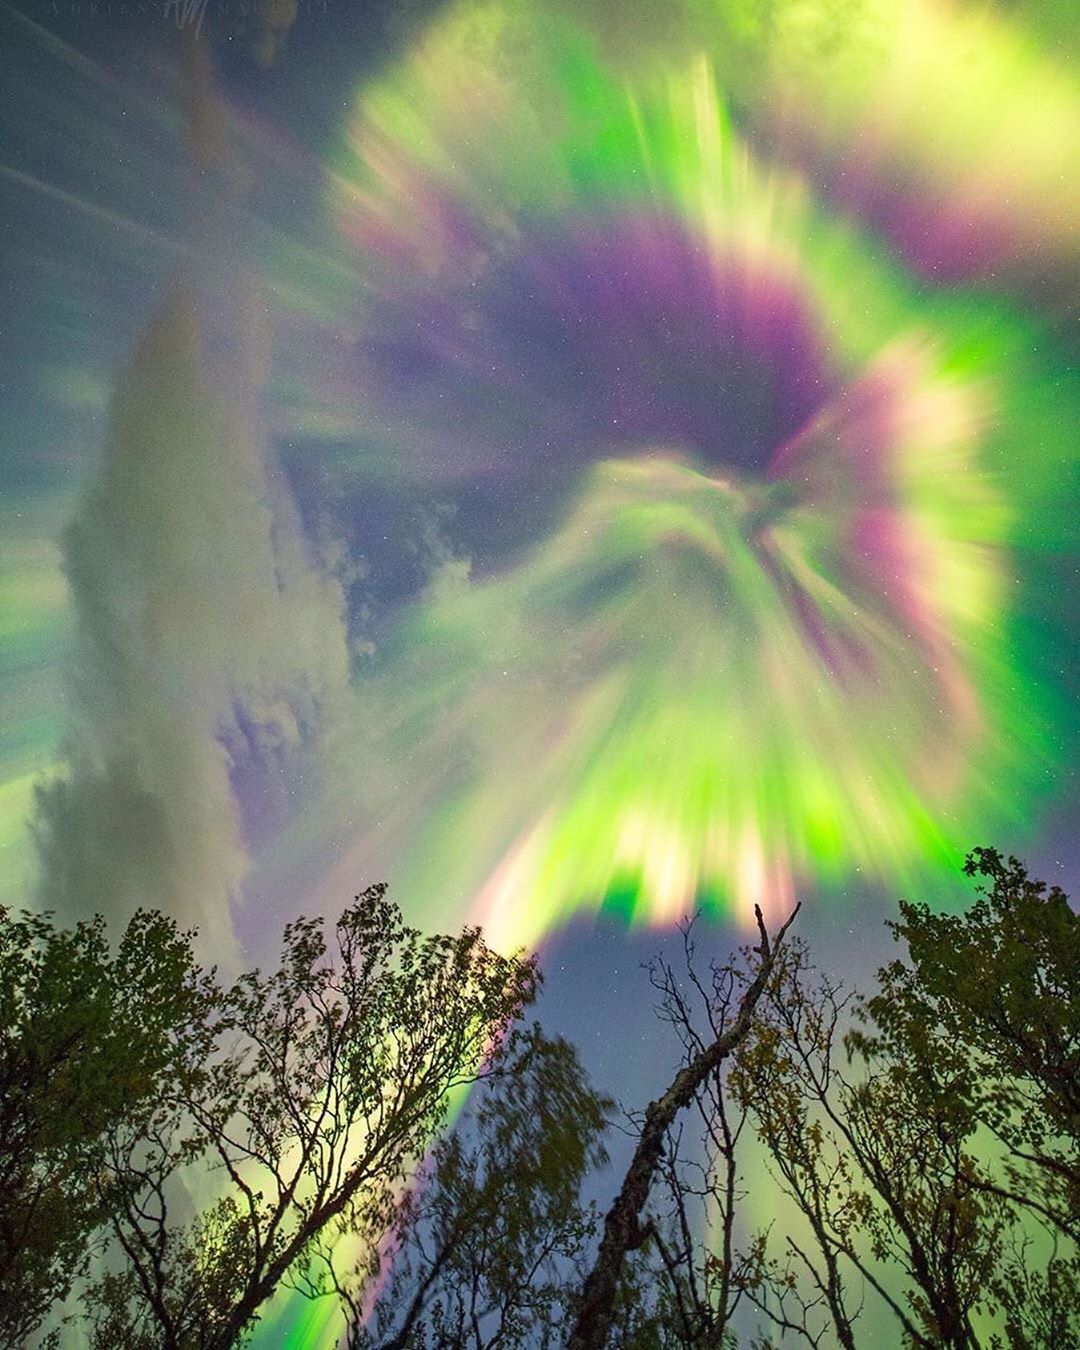 The Aurora is an incredible light show caused by collisions between electrically charged particles released from the sun that enter the earth’s atmosphere and collide with gases such as oxygen and nitrogen. The lights are seen around the magnetic poles of the northern and southern hemispheres.